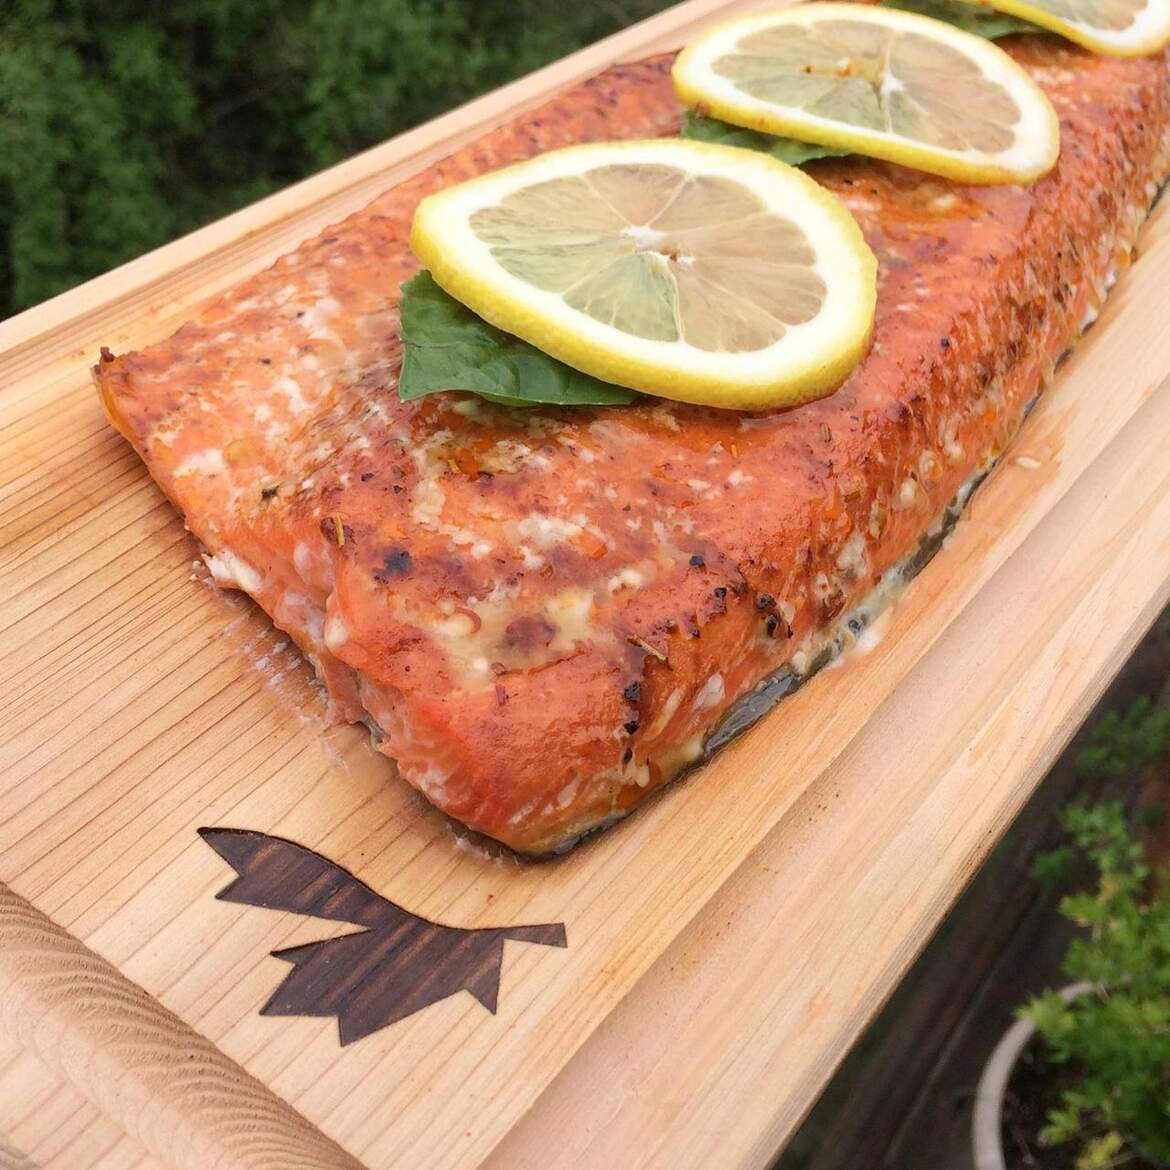 A wooden board with salmon and lemon slices on it.